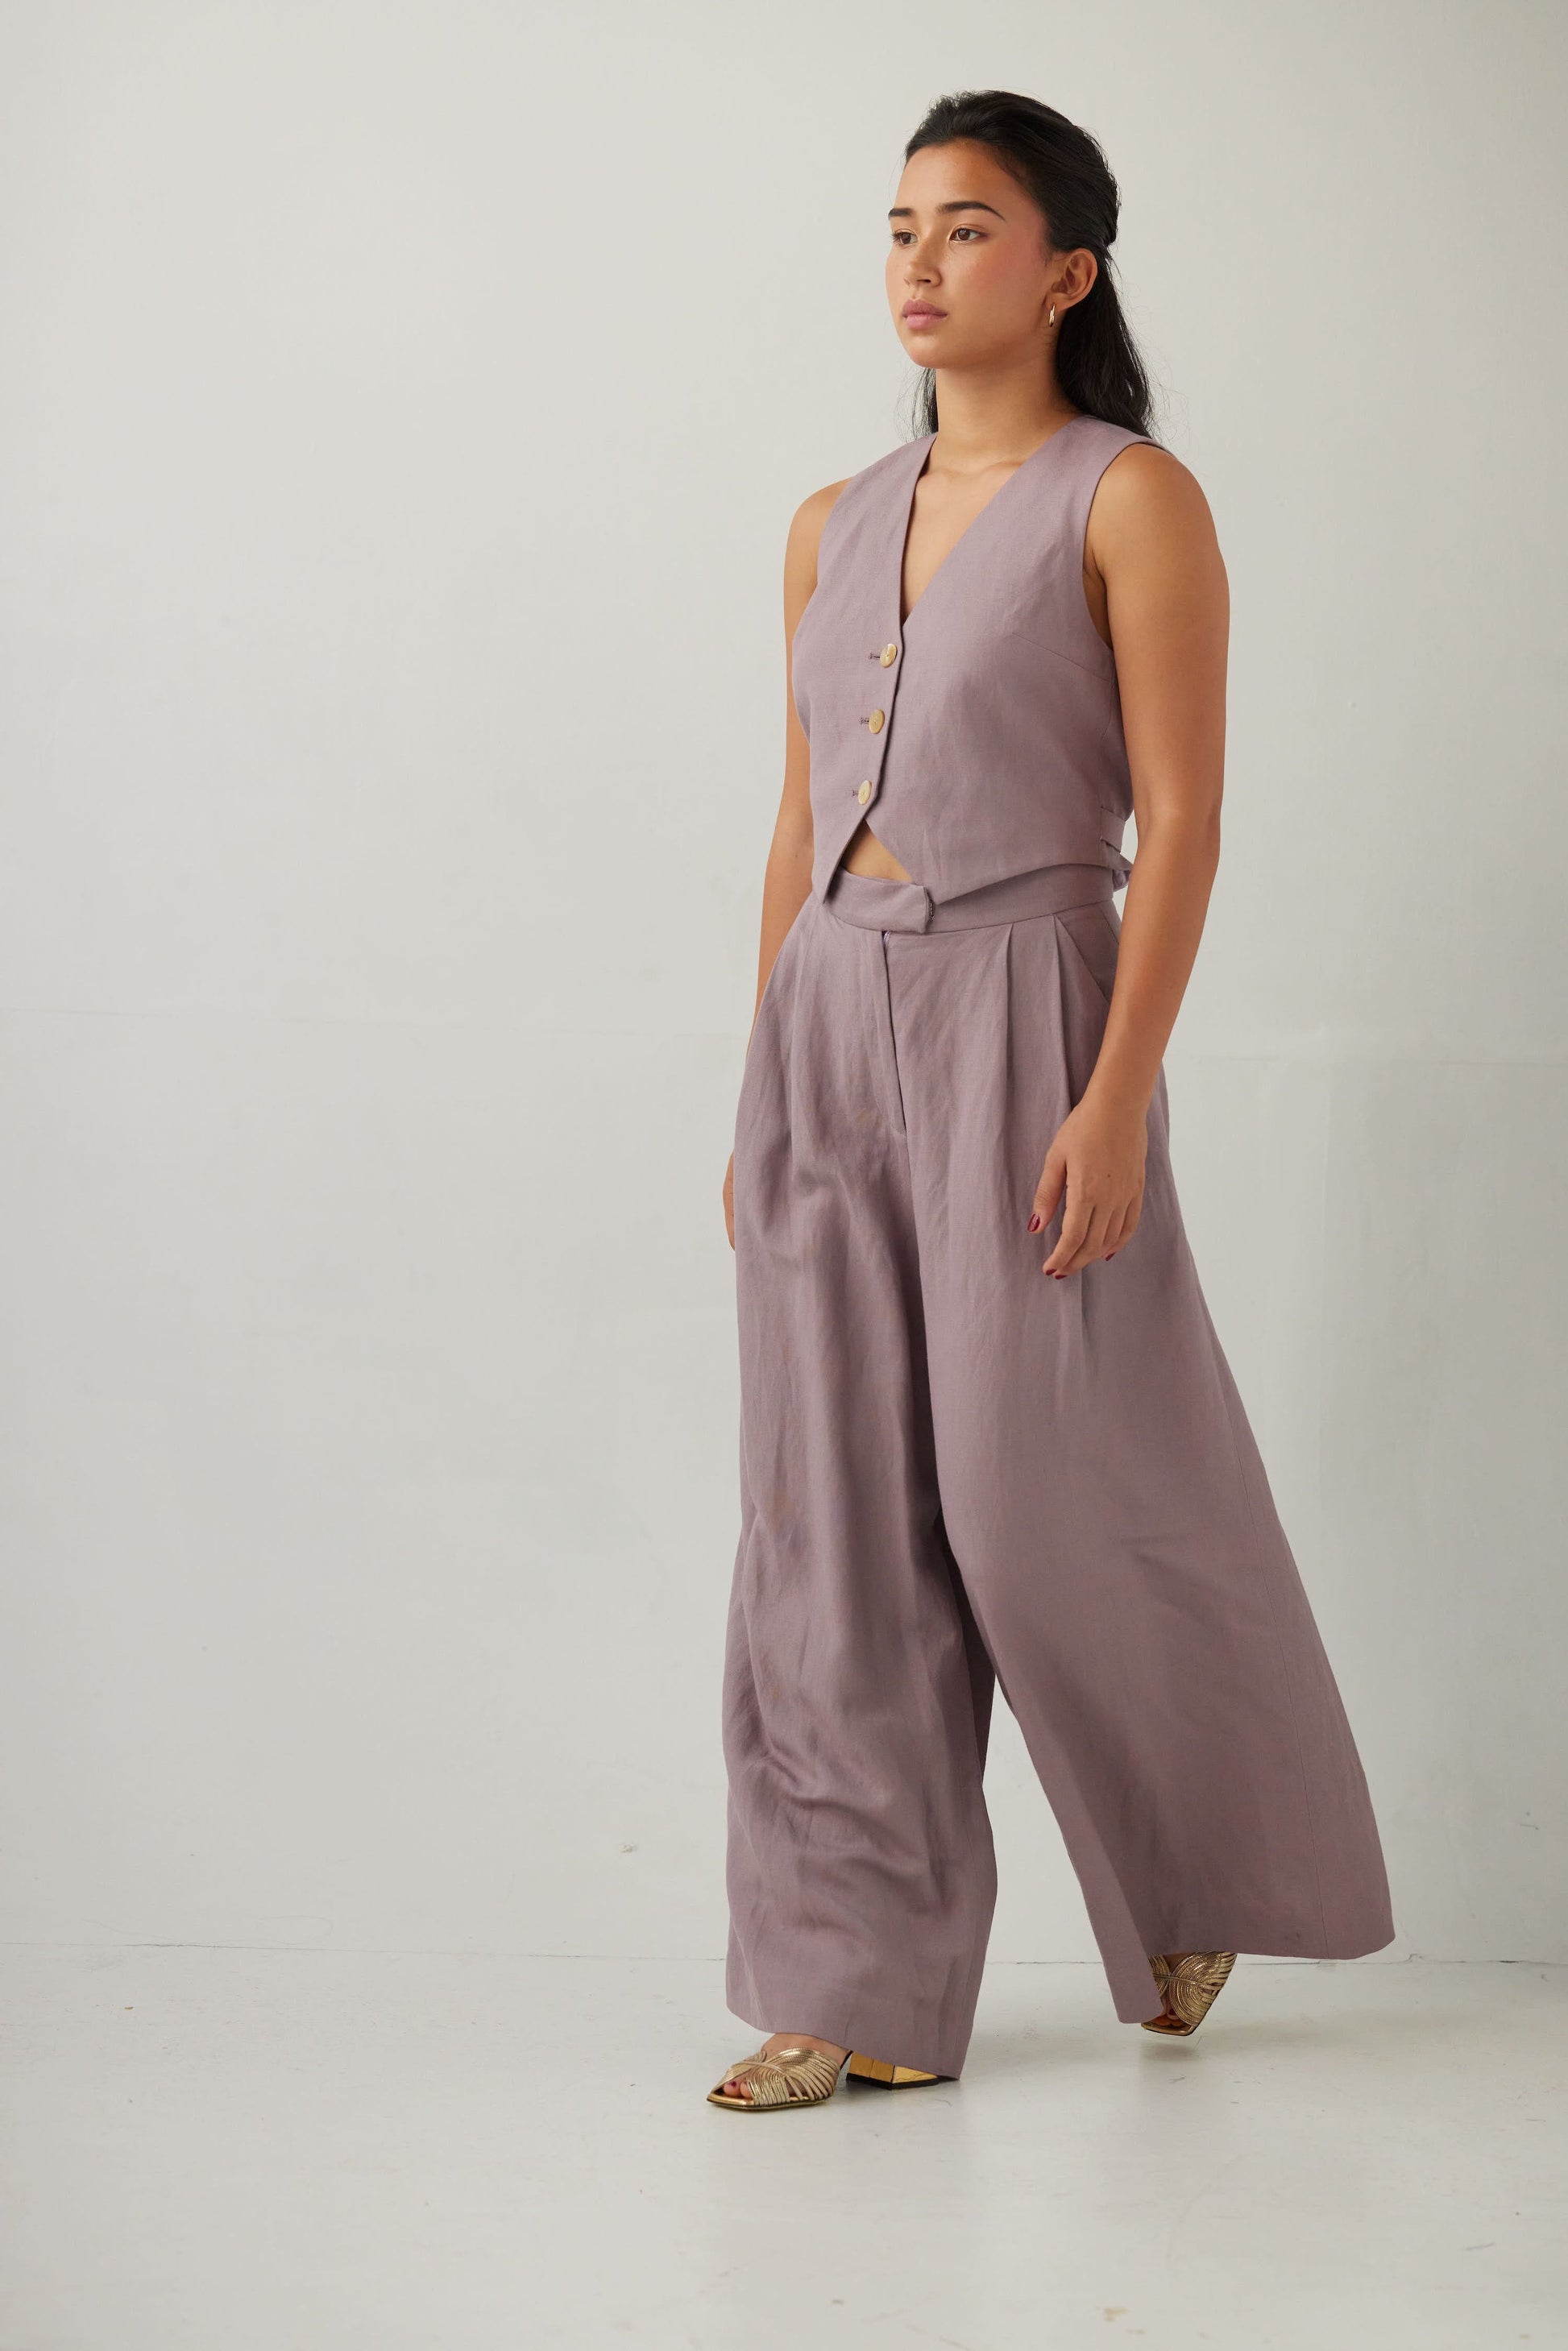 Katherine Pant in Linen Blend Pants CHRISTINE ALCALAY Wisteria 00 